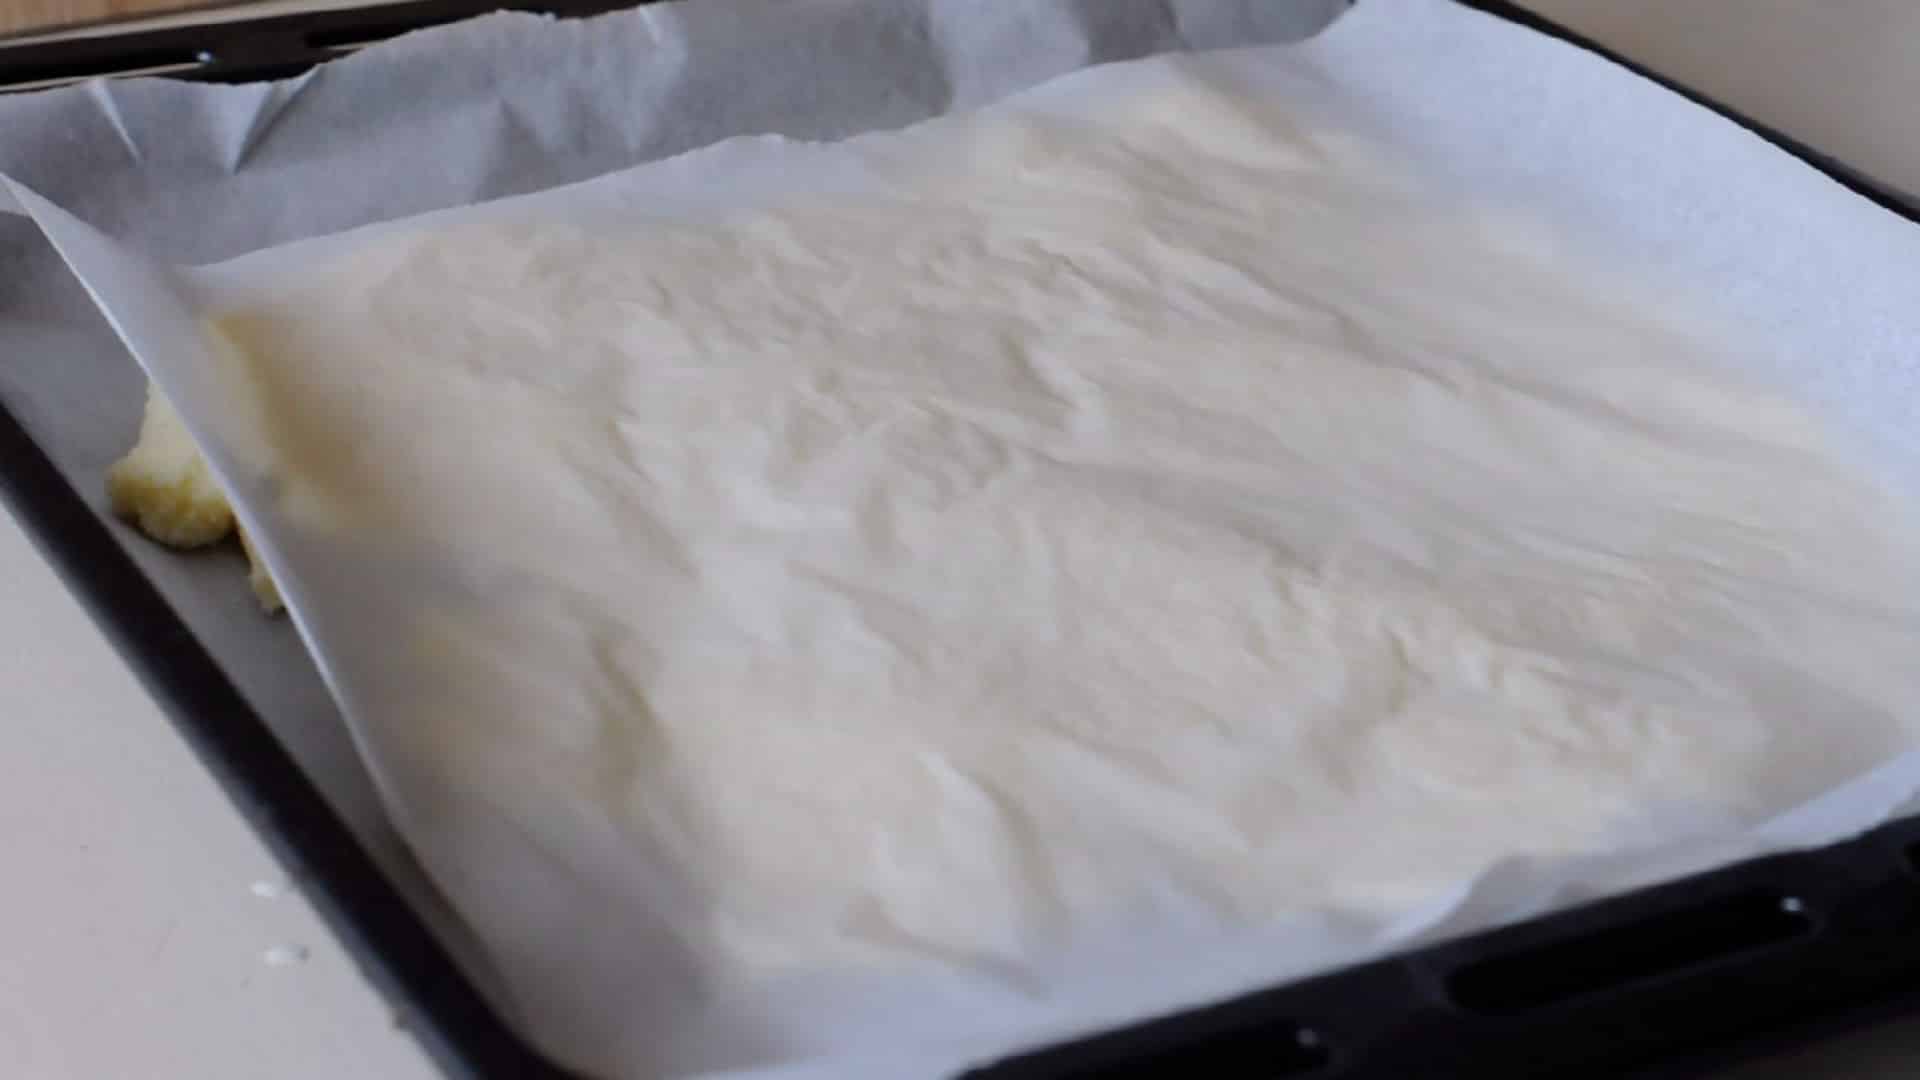 Covering it with another sheet of parchment paper